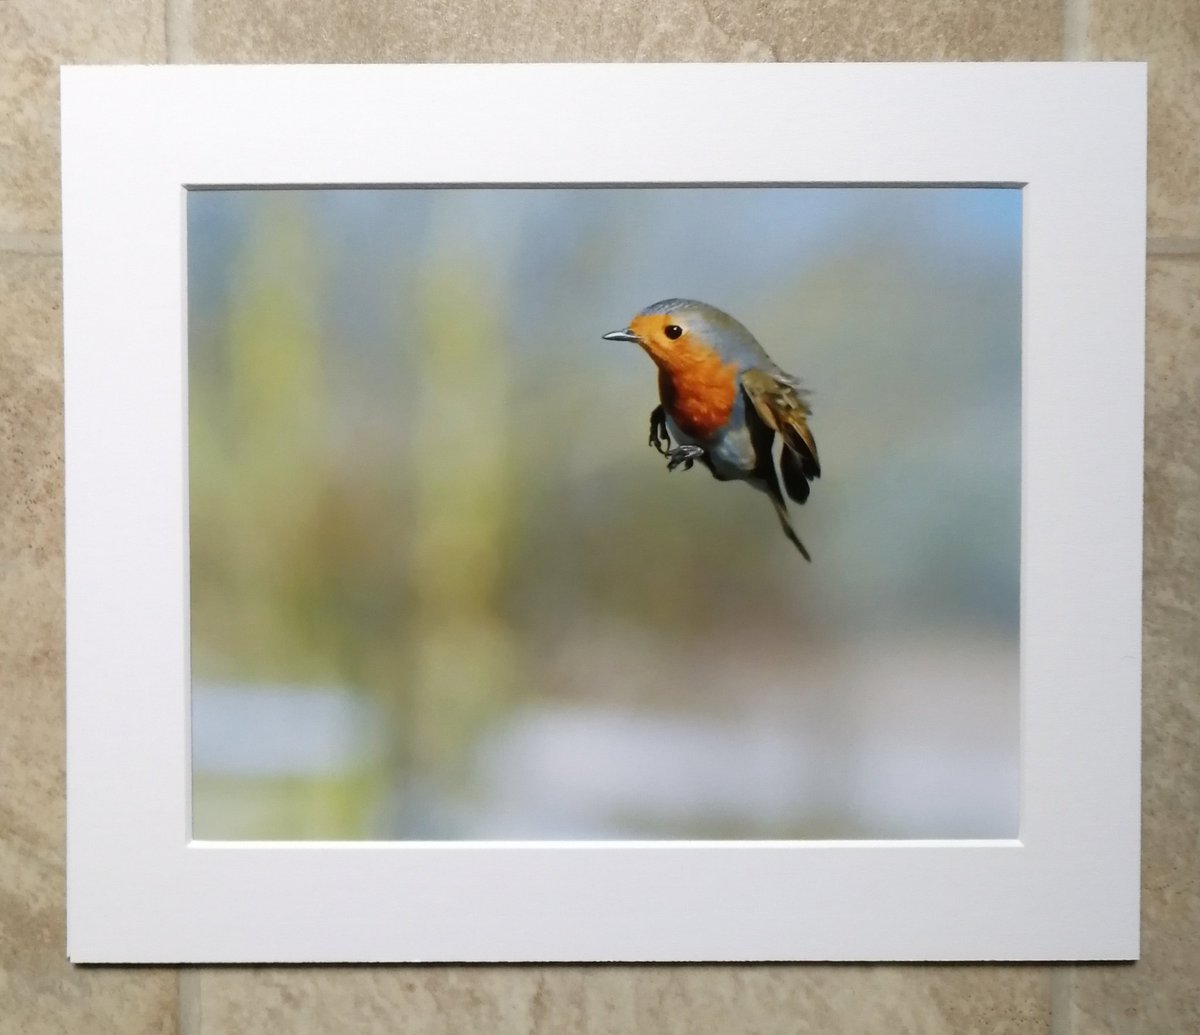 'Super Robin' - 10x8 mounted print.  You can buy it here; https://www.carlbovis.com/product-page/super-robin-10x8-mounted-print 